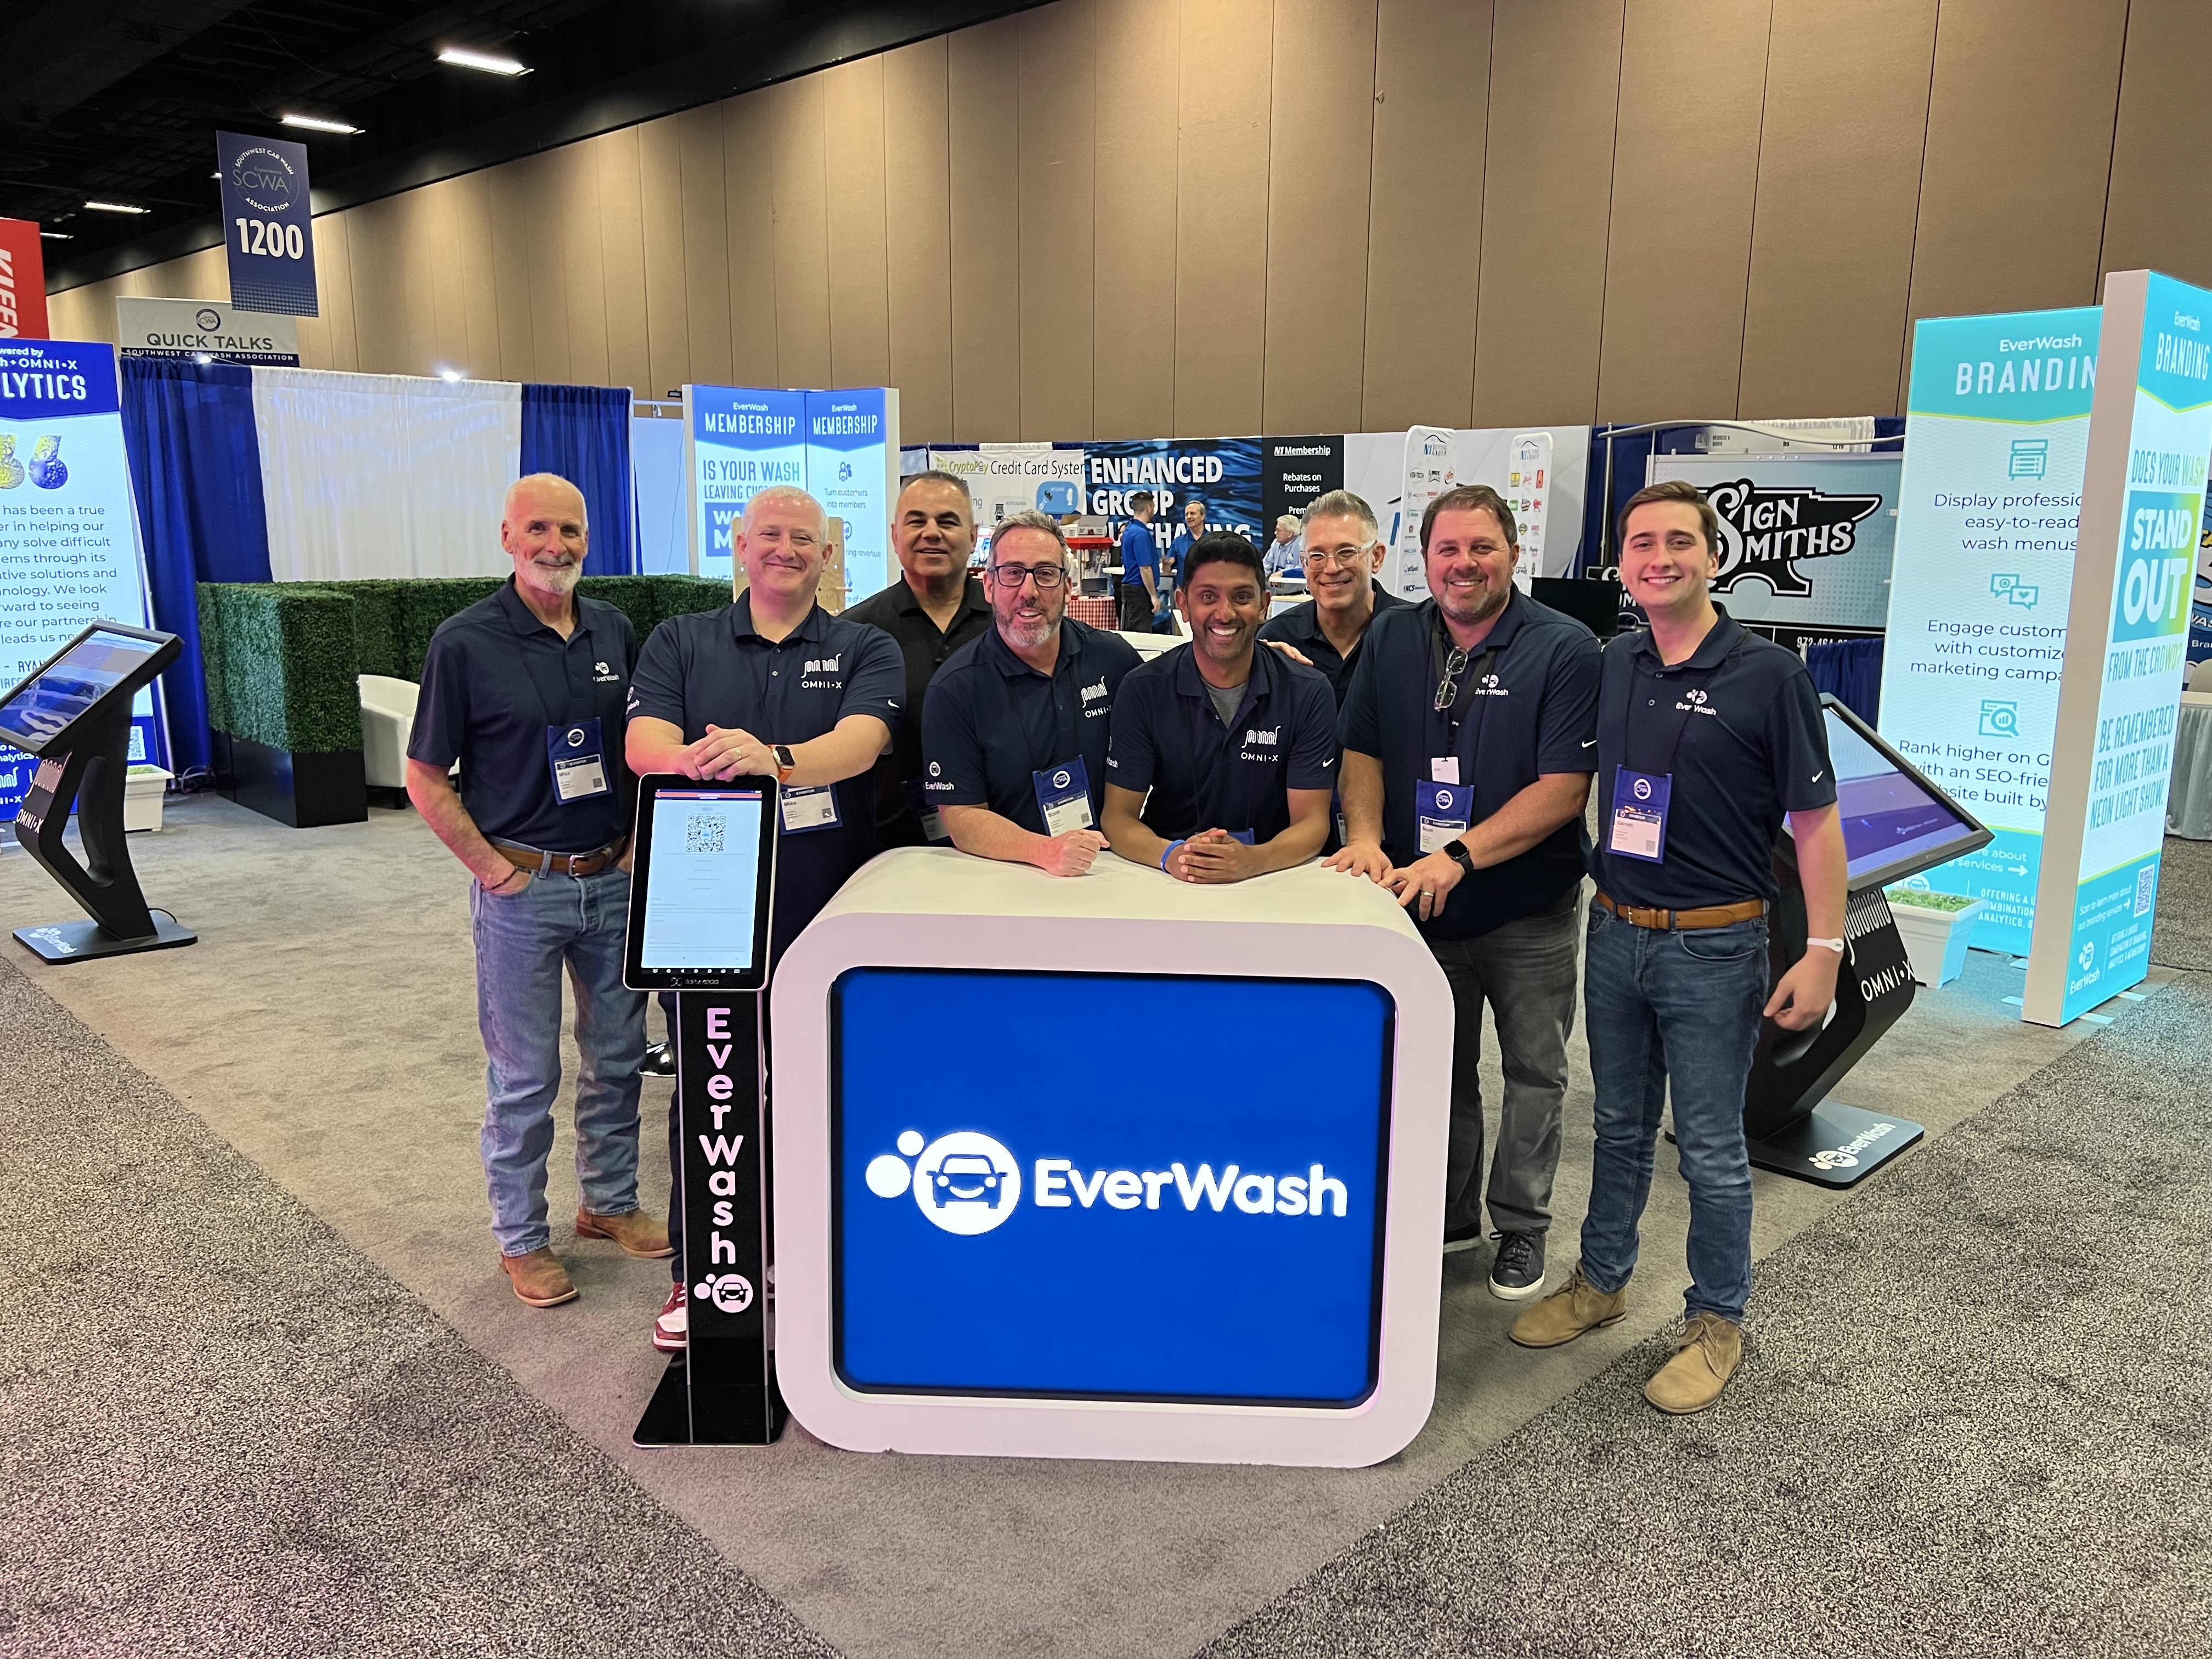 EverWash and omniX booth attendees